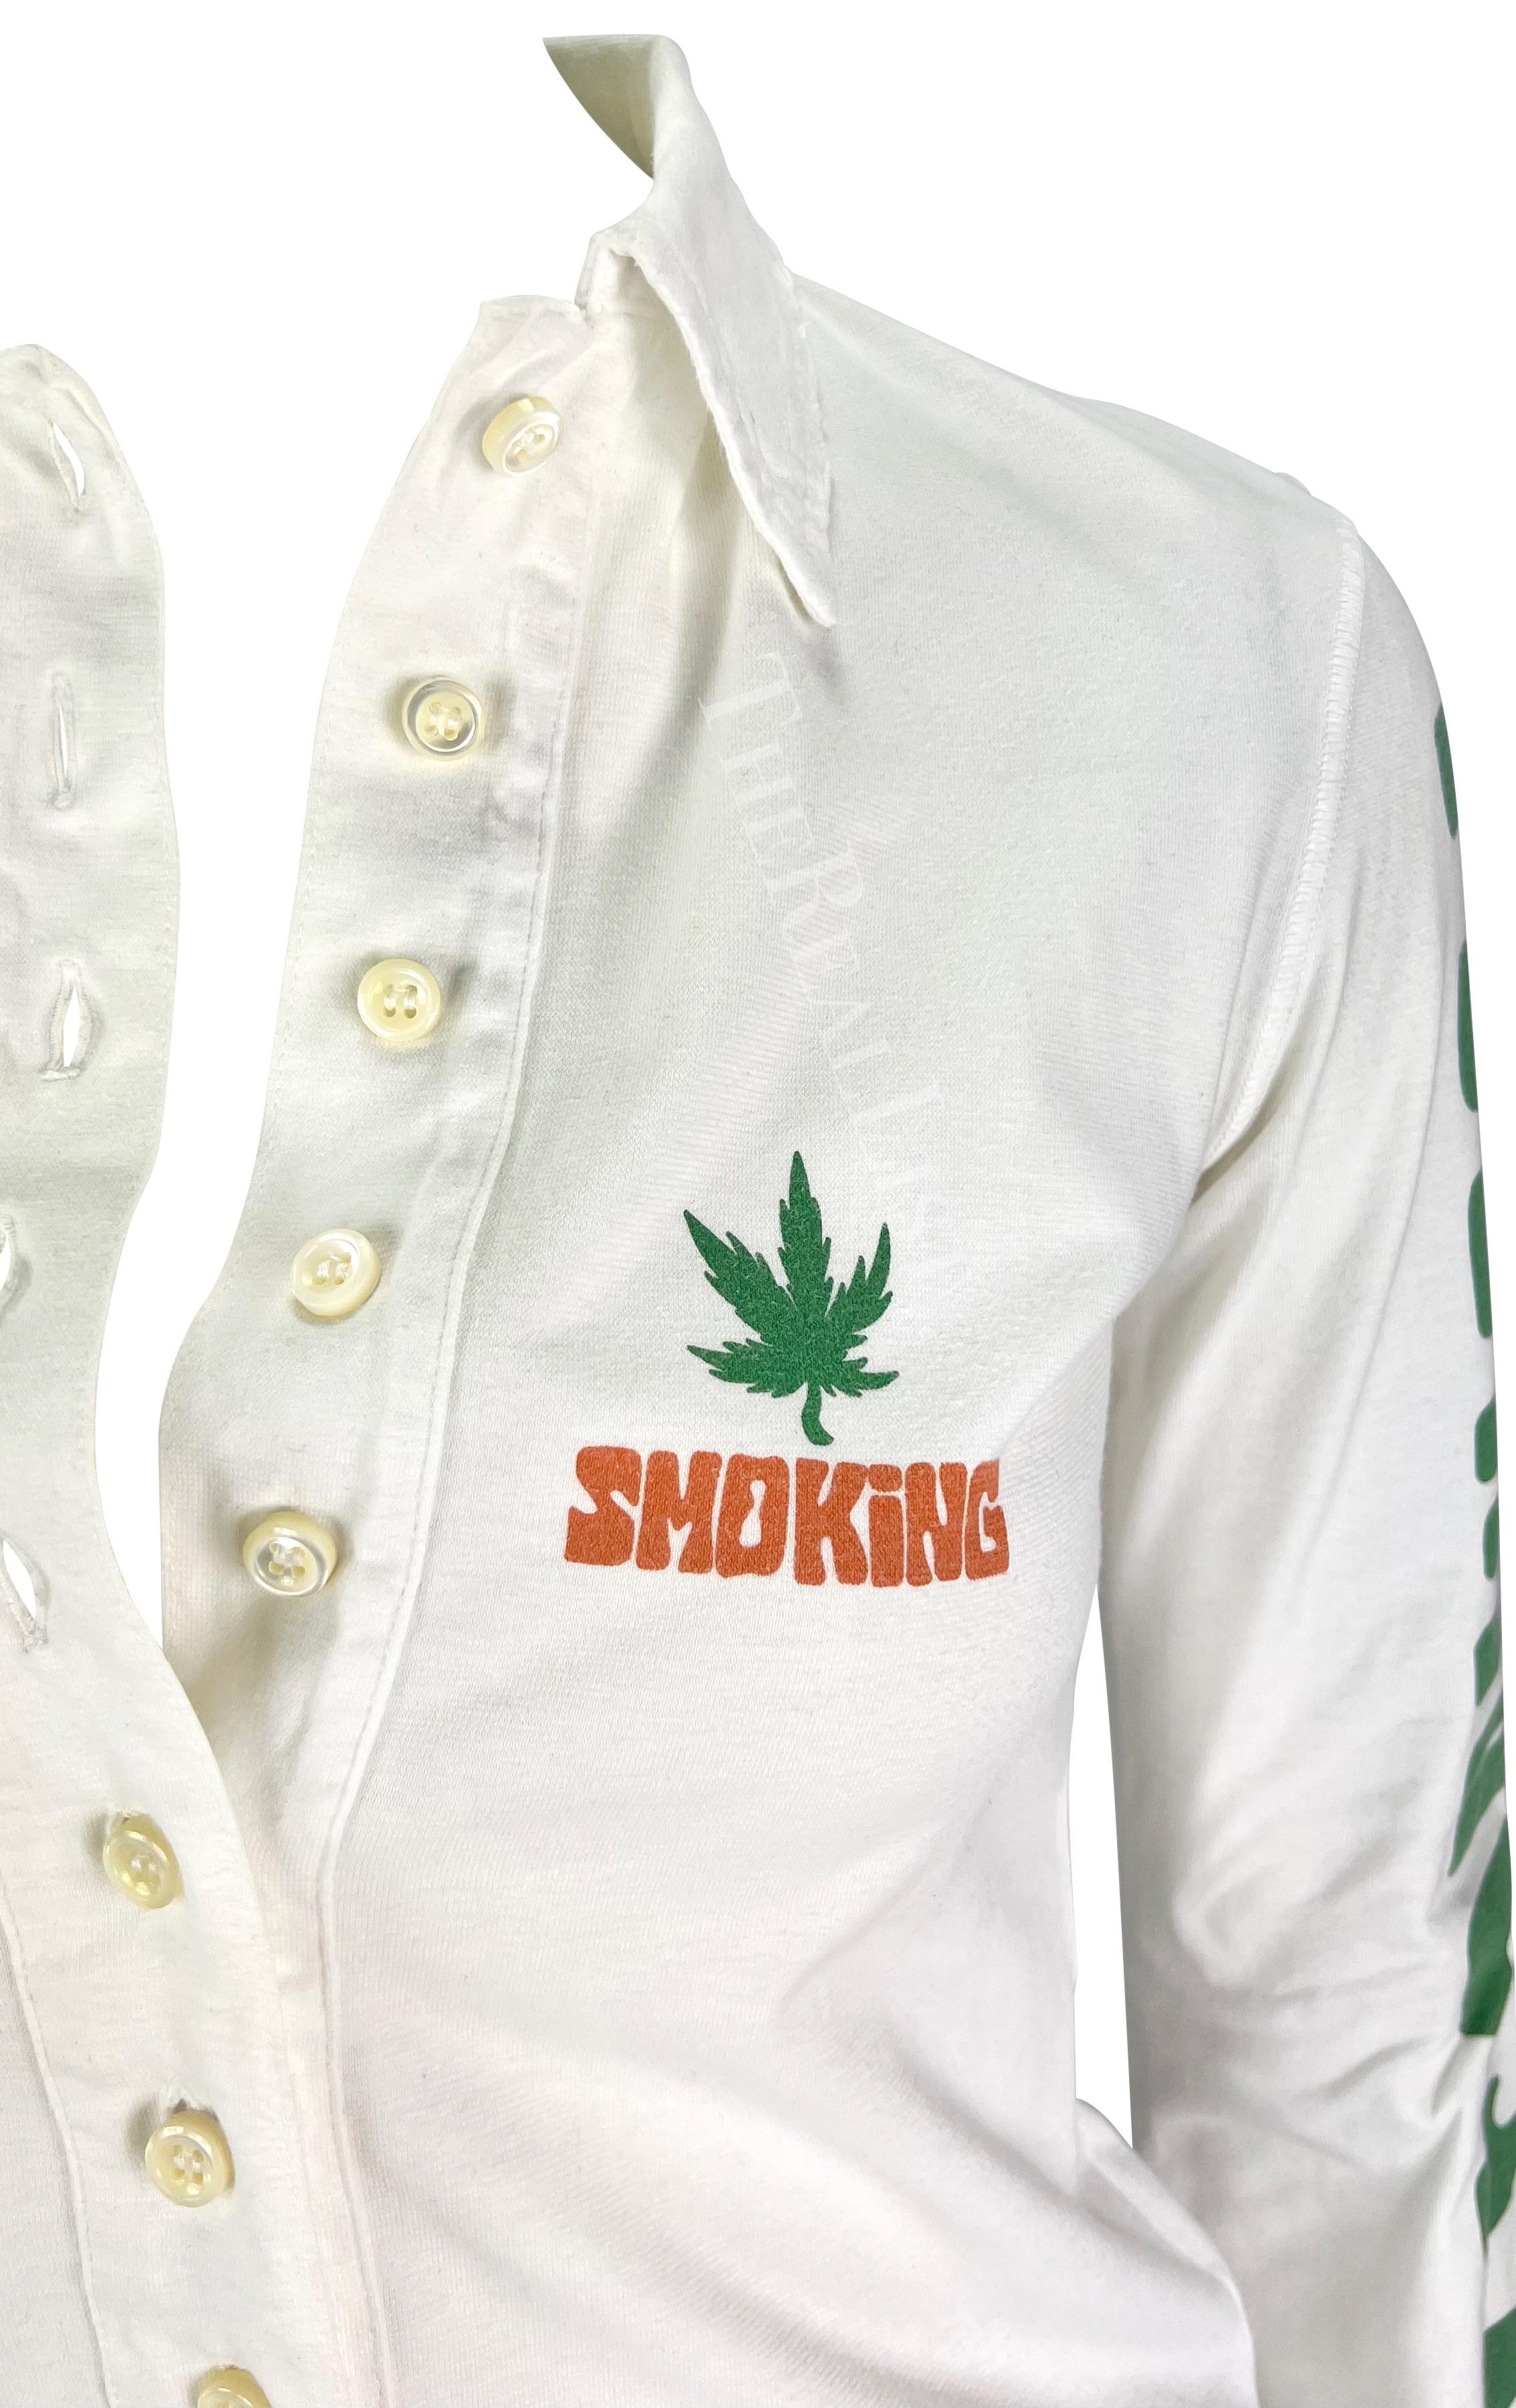 S/S 2005 Dsquared2  'Stoner' Marijuana Smoking White Distressed Rugby Polo Top  In Excellent Condition For Sale In West Hollywood, CA